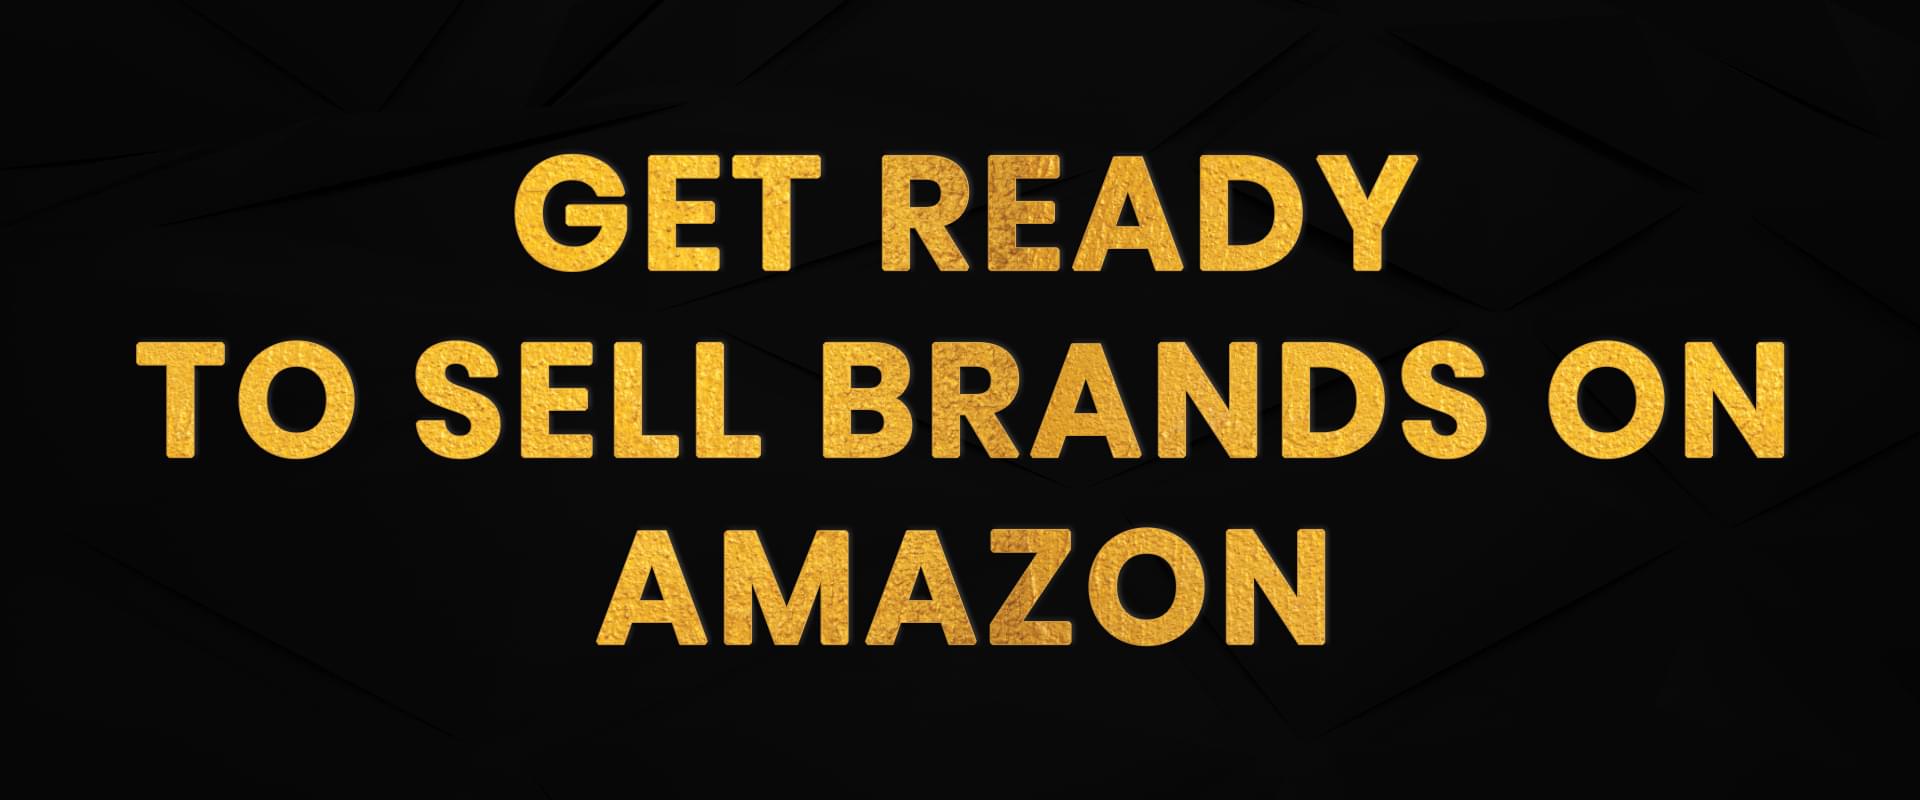 The funnel guru ungating services on amazon